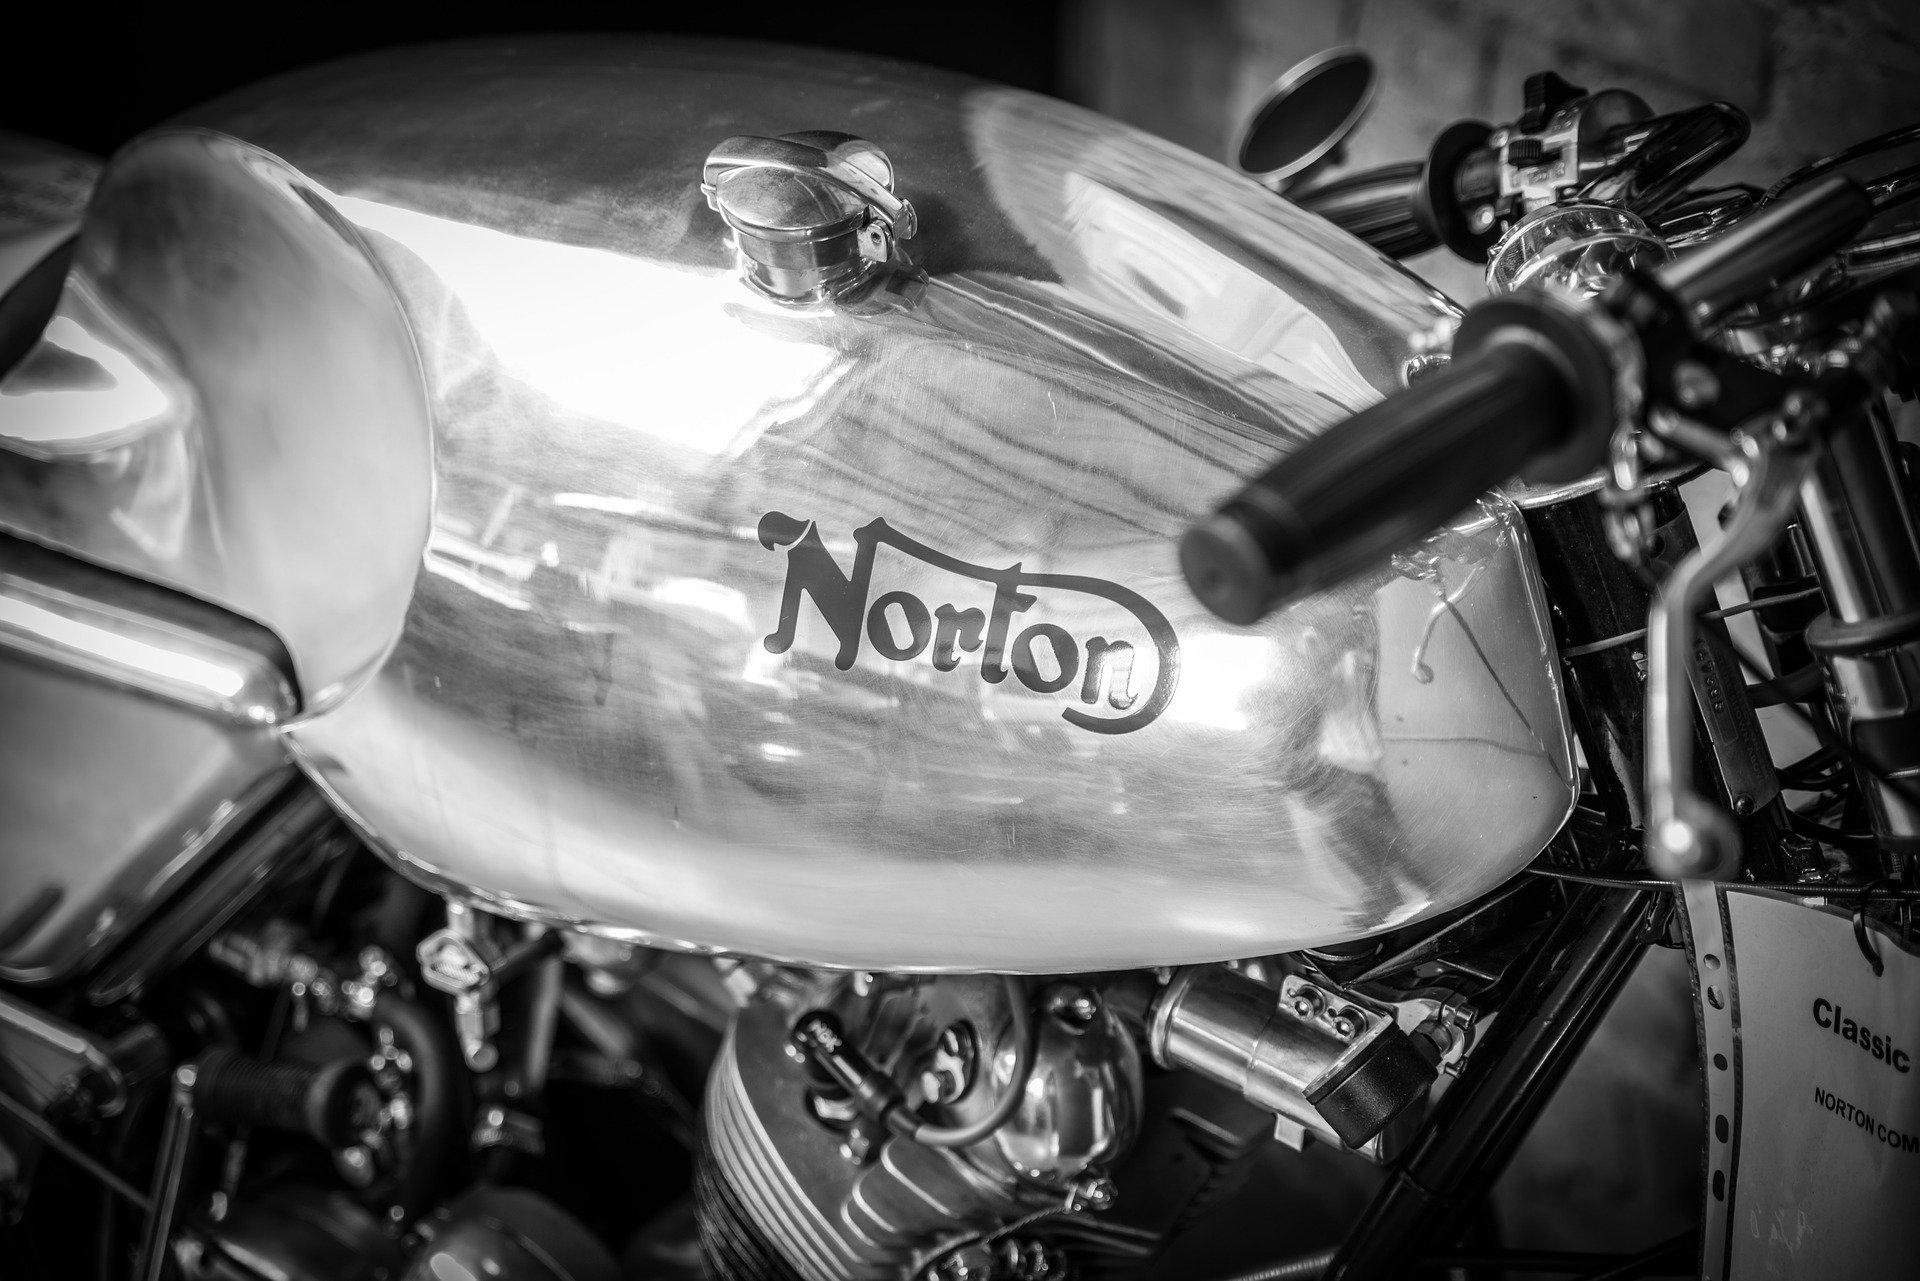 Norton Motorcycles seeks buyers as it enters administration